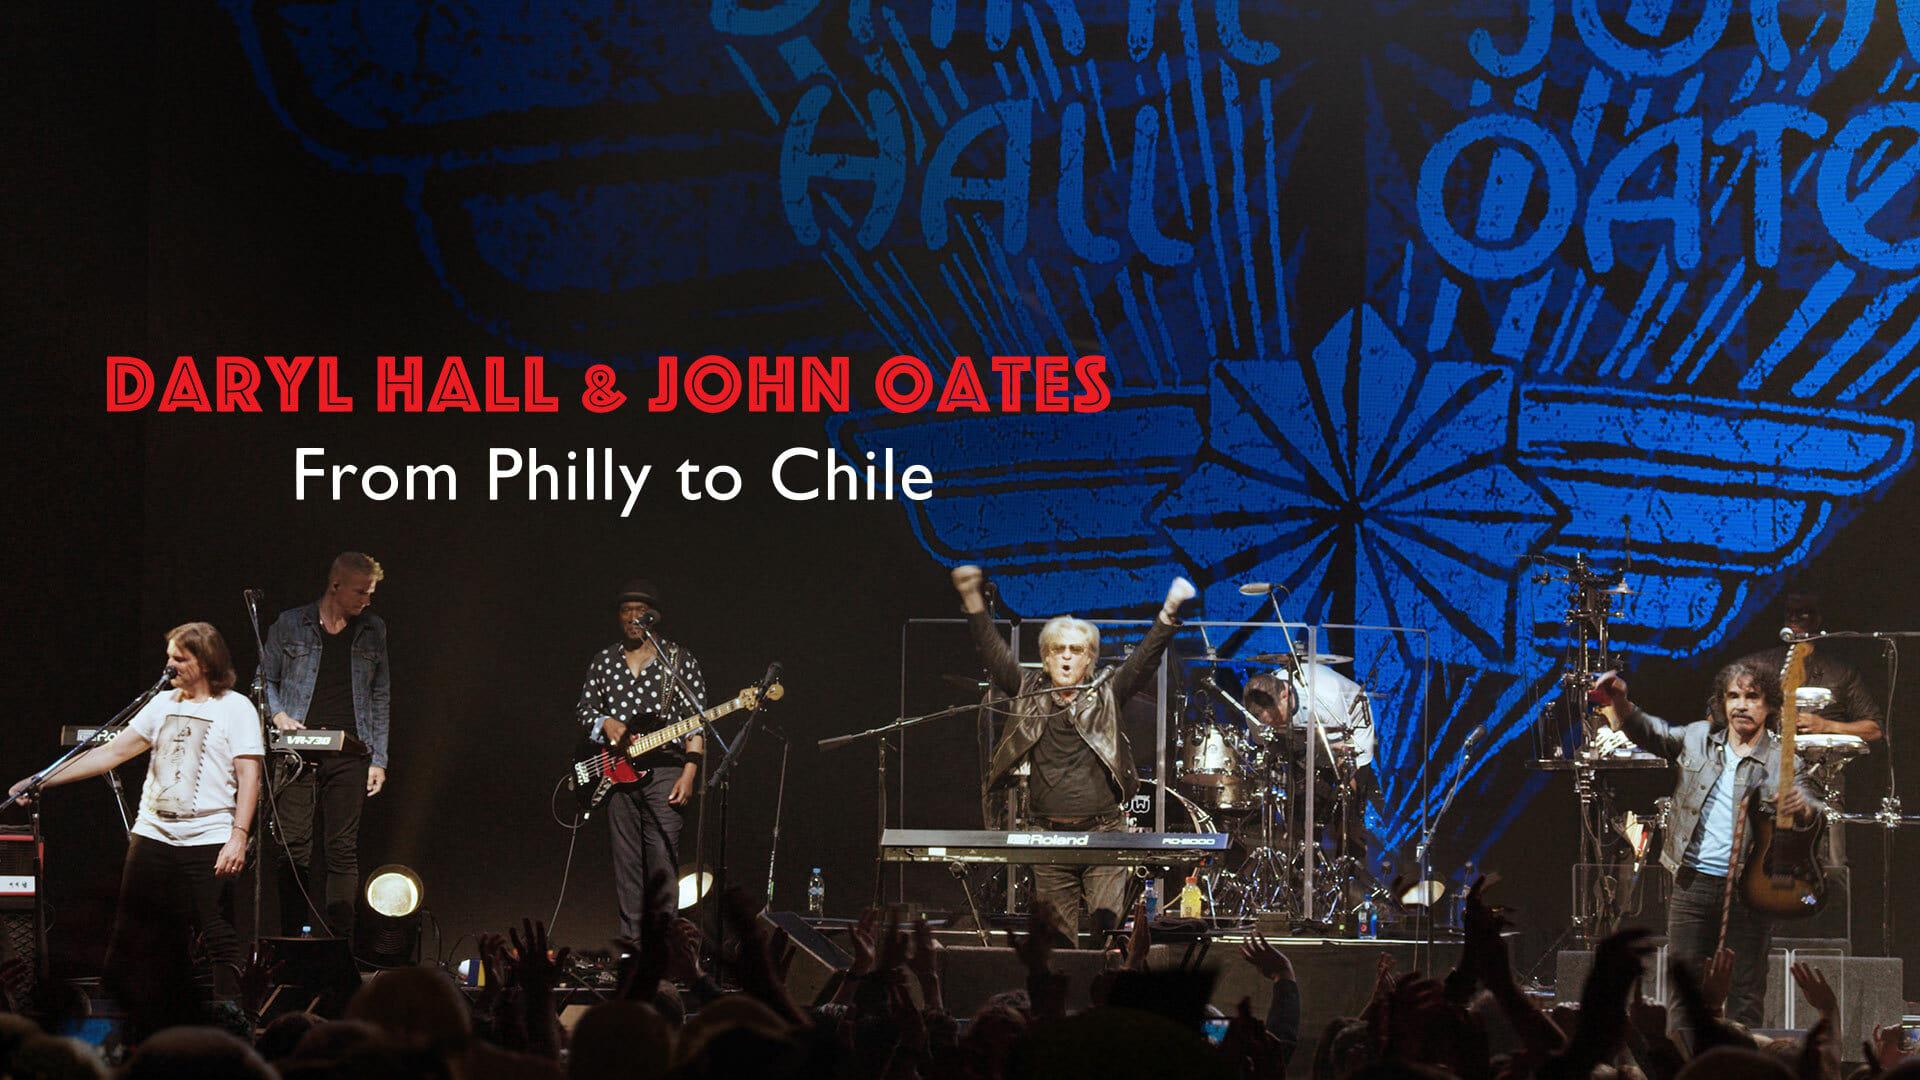 Daryl Hall & John Oates: From Philly to Chile backdrop